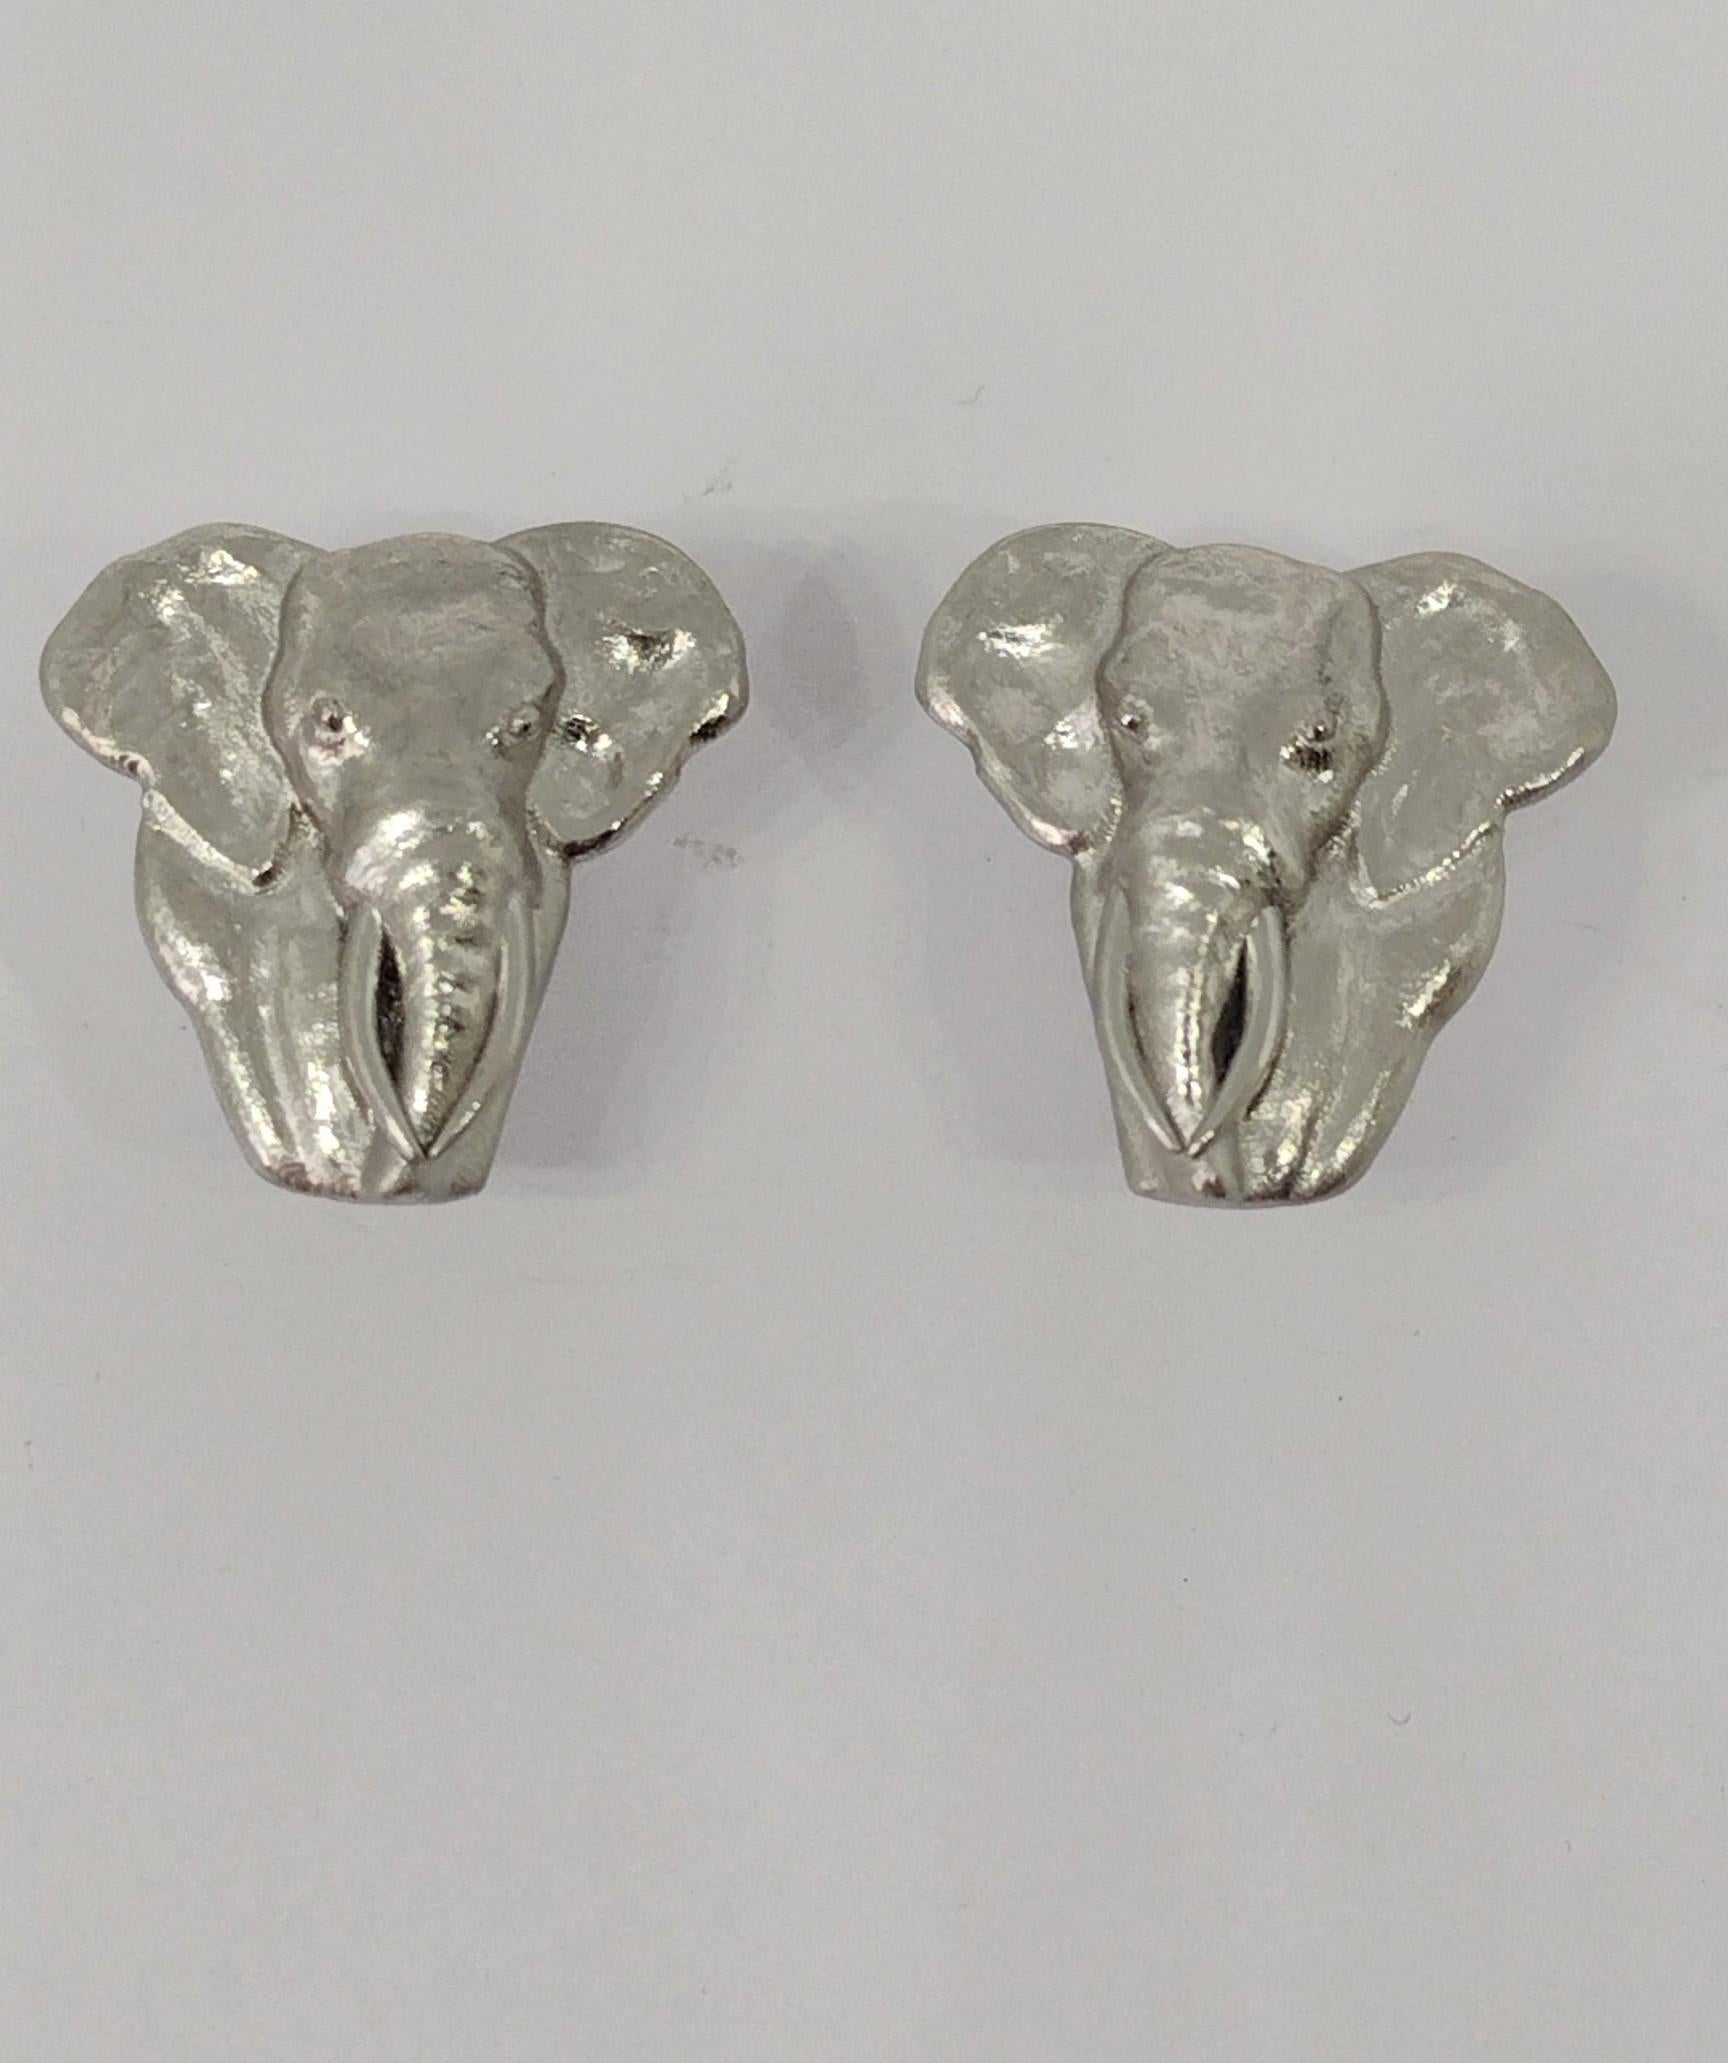 Platinum  Elephant Cufflinks  Now it's true. No more imaginary pink elephants. Skip the pink, There can be  White  2 elephants in the room!  Can you imagine riding an elephant?  Have the only elephants stomping through the concrete jungle of NYC or